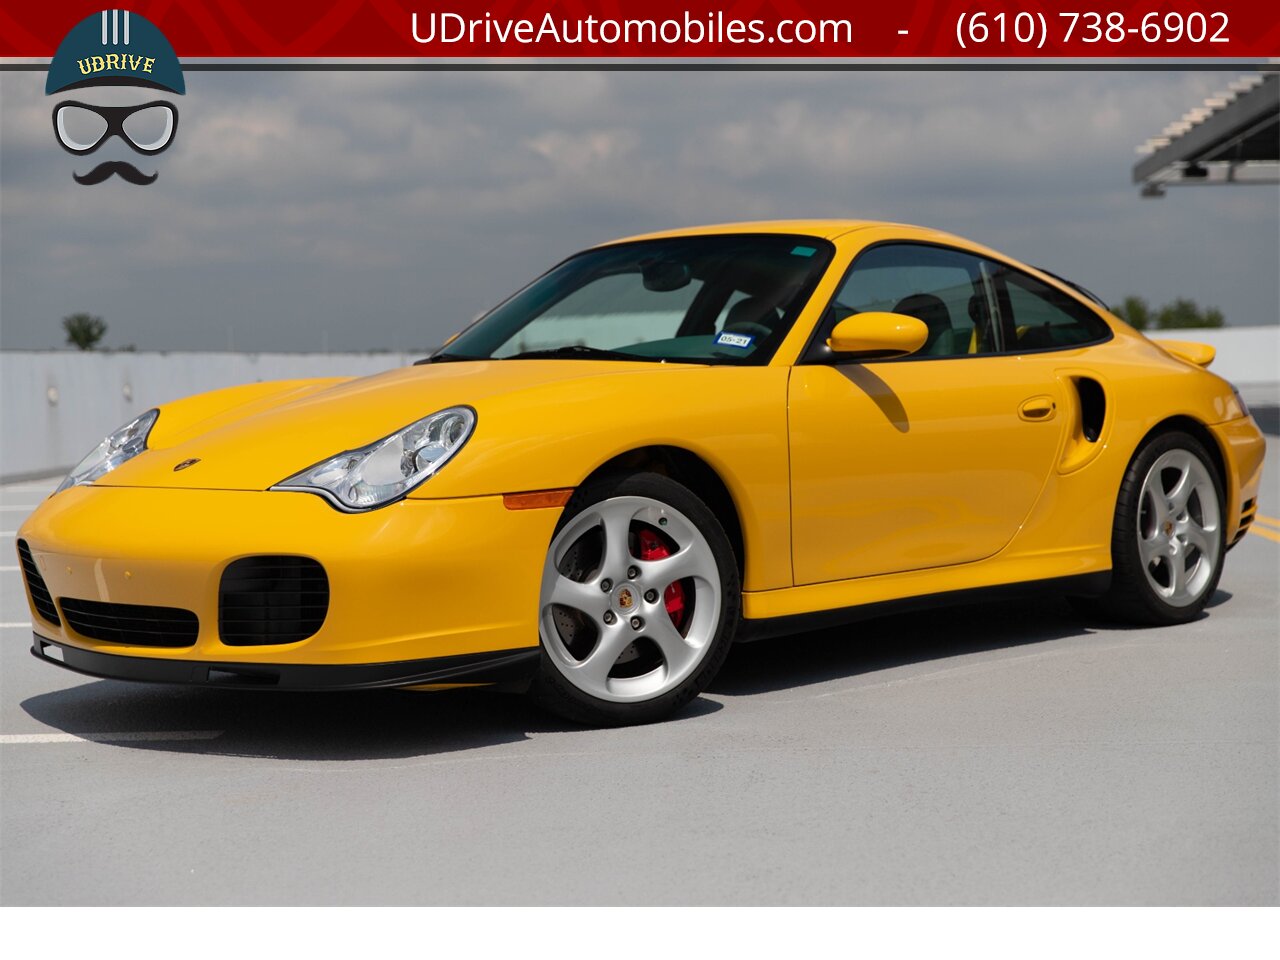 2003 Porsche 911 996 Turbo X50 6Sp Nephrite Green Lthr 9k Miles  Deviating Yellow Stitching Collector Grade BACK AGAIN - Photo 1 - West Chester, PA 19382